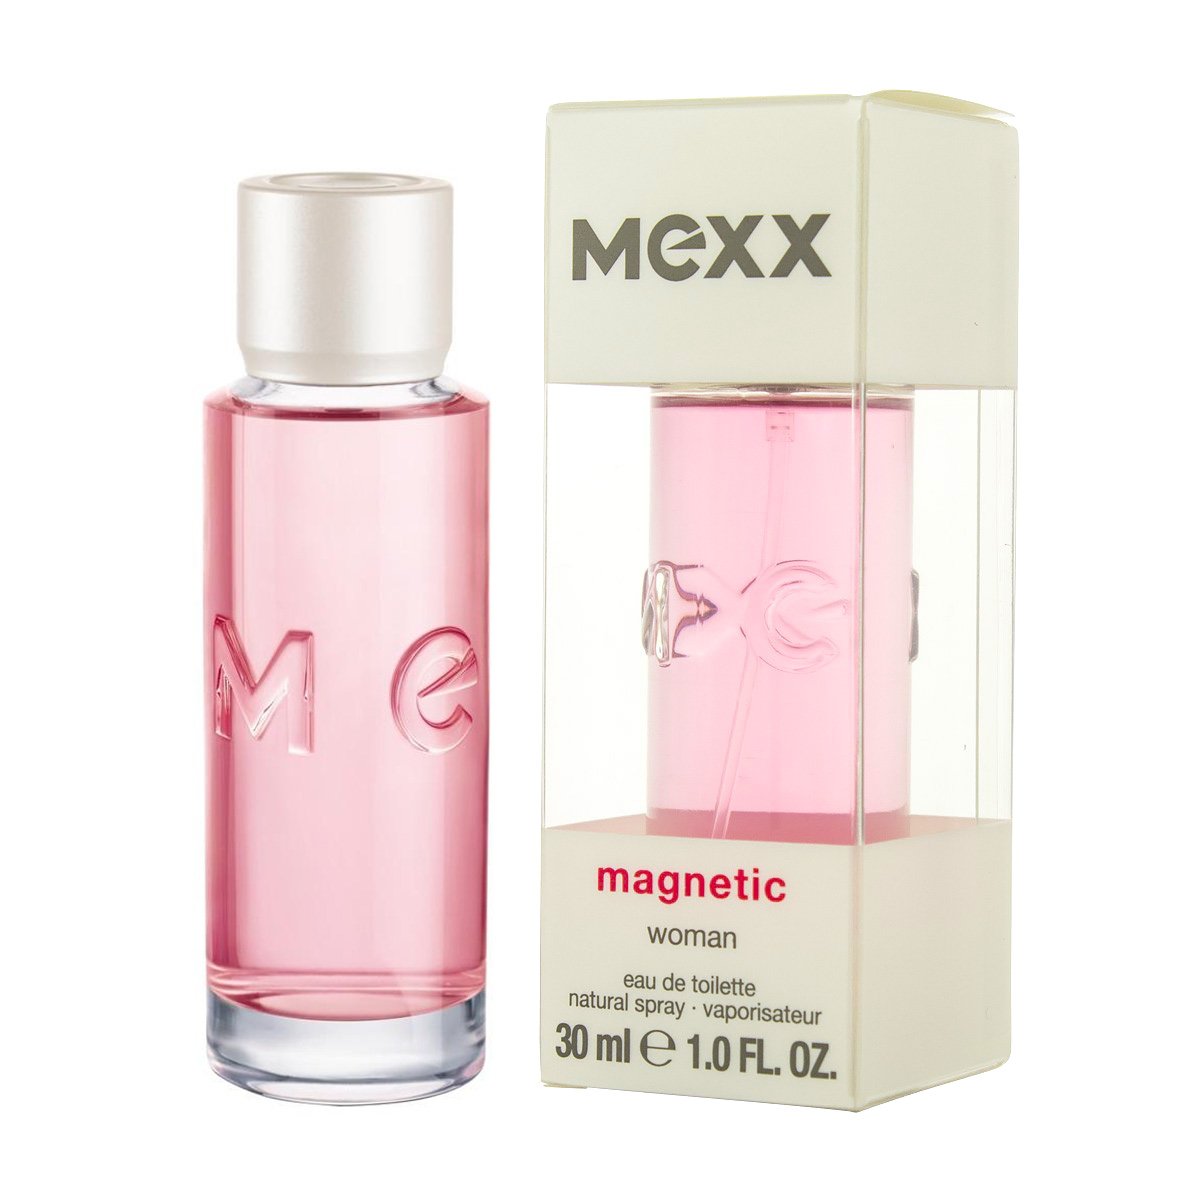 MEXX MAGNETIC WOMAN